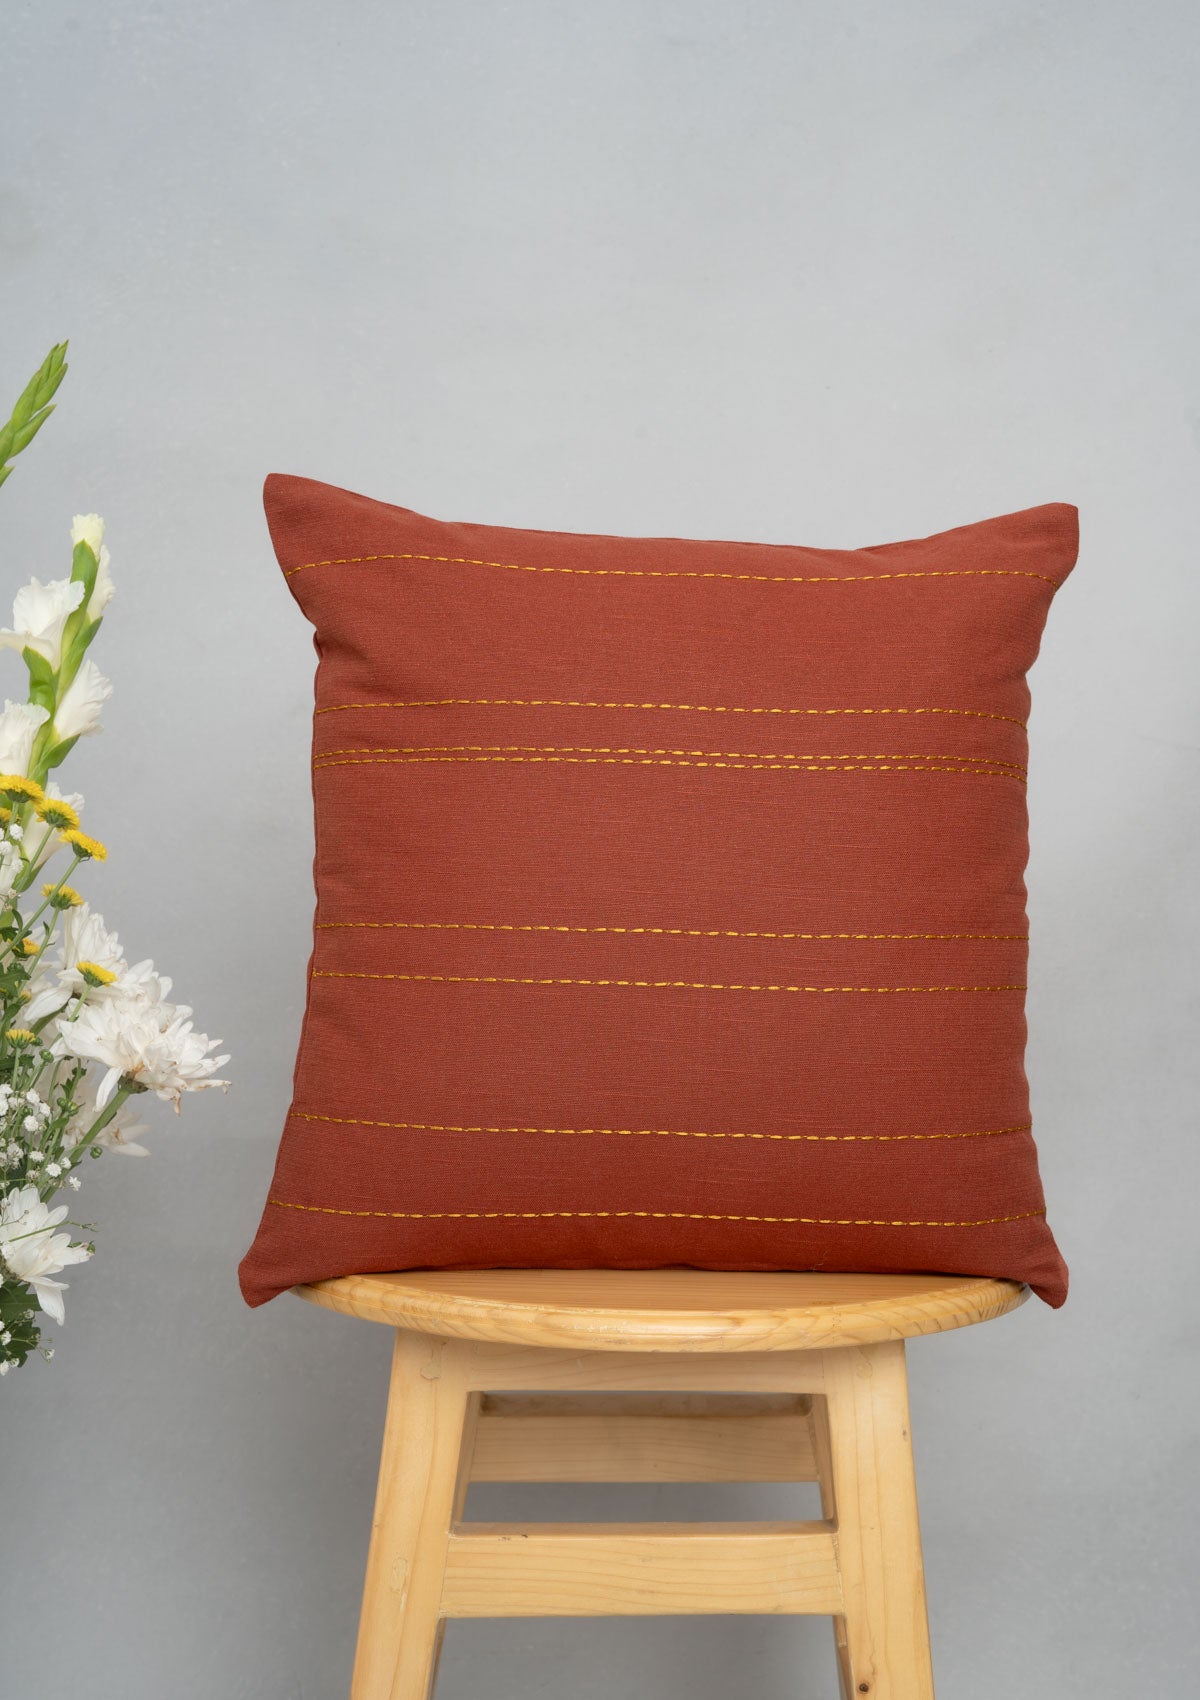 Silk Route 100% cotton embroidered decorative cushion cover for sofa - Brick Red